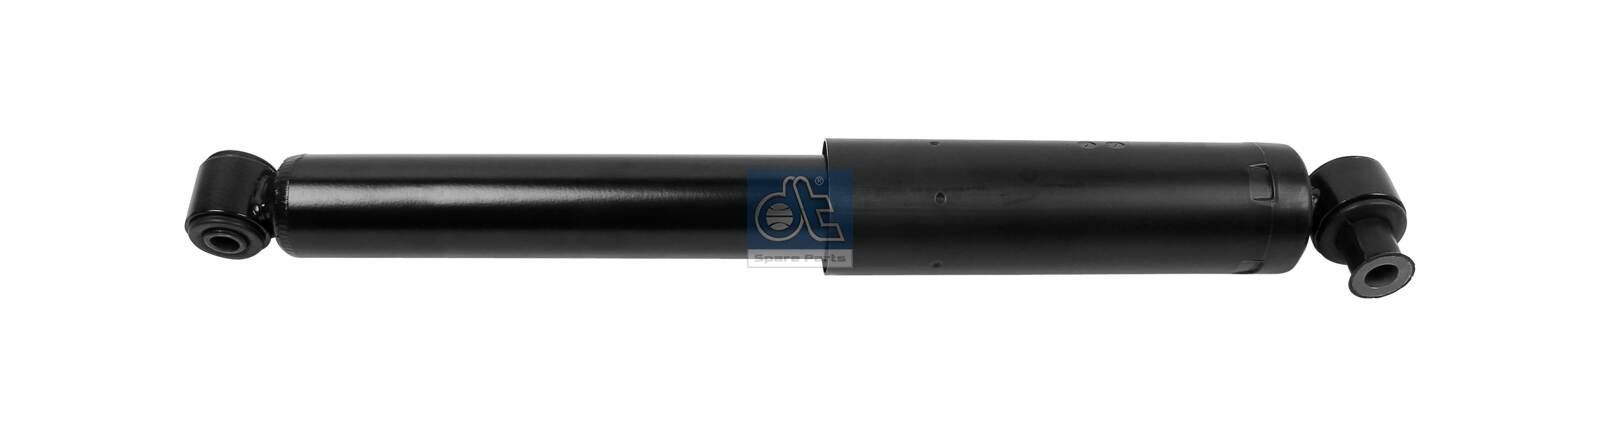 313 504 DT Spare Parts 13.17166 Shock absorber 6C11-18080-WB